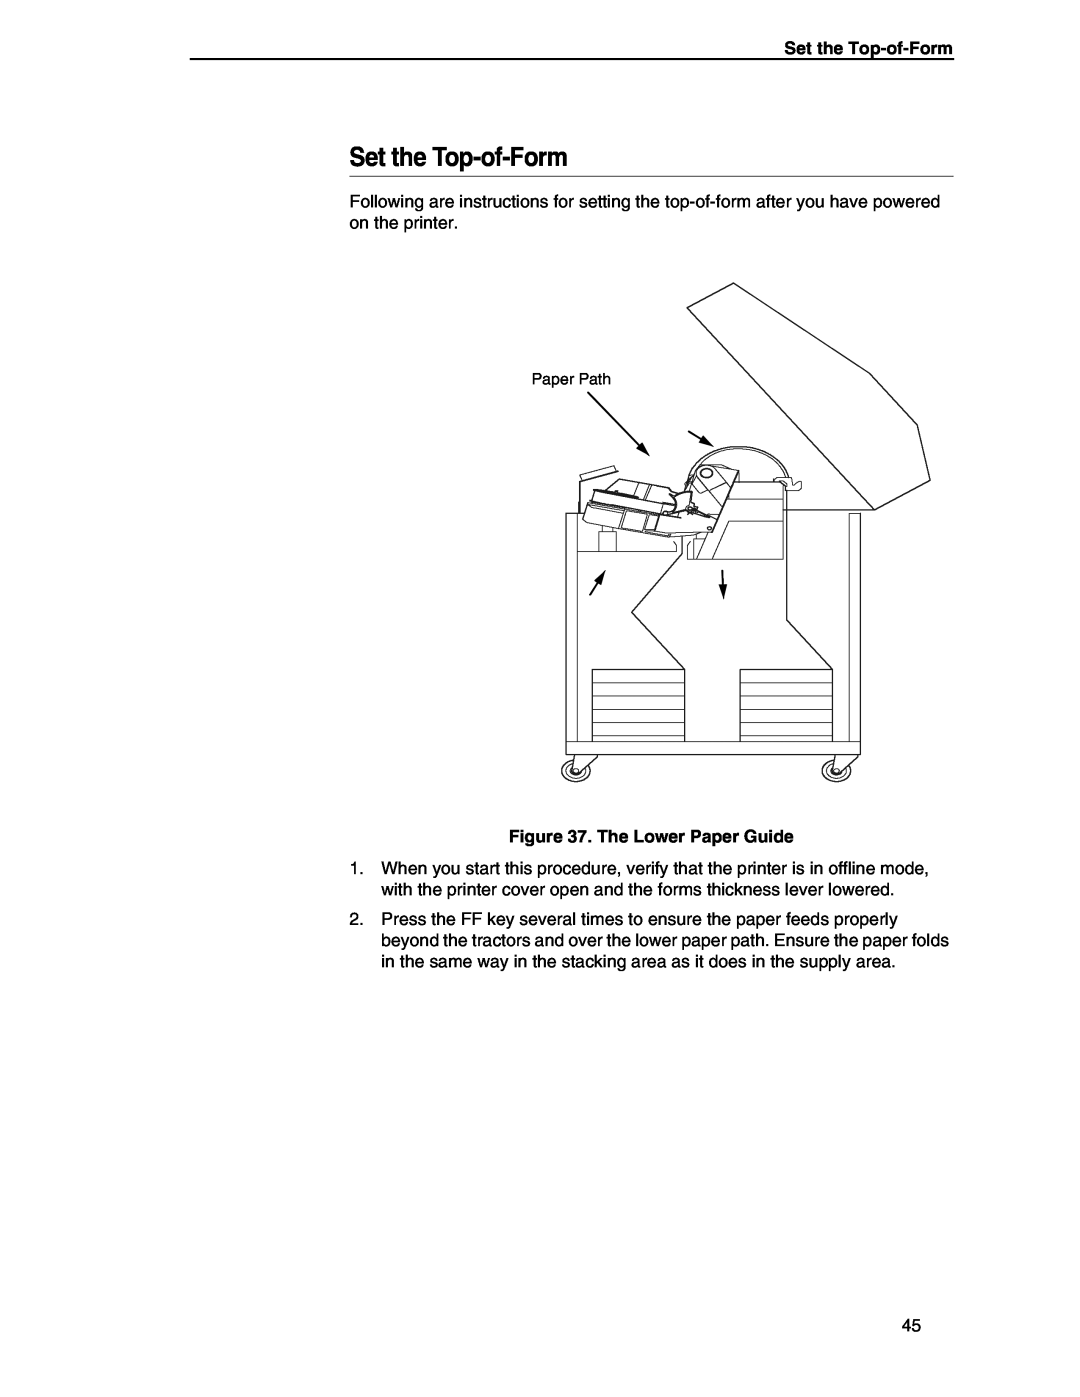 Compaq P5000 Series setup guide Set the Top-of-Form, The Lower Paper Guide 